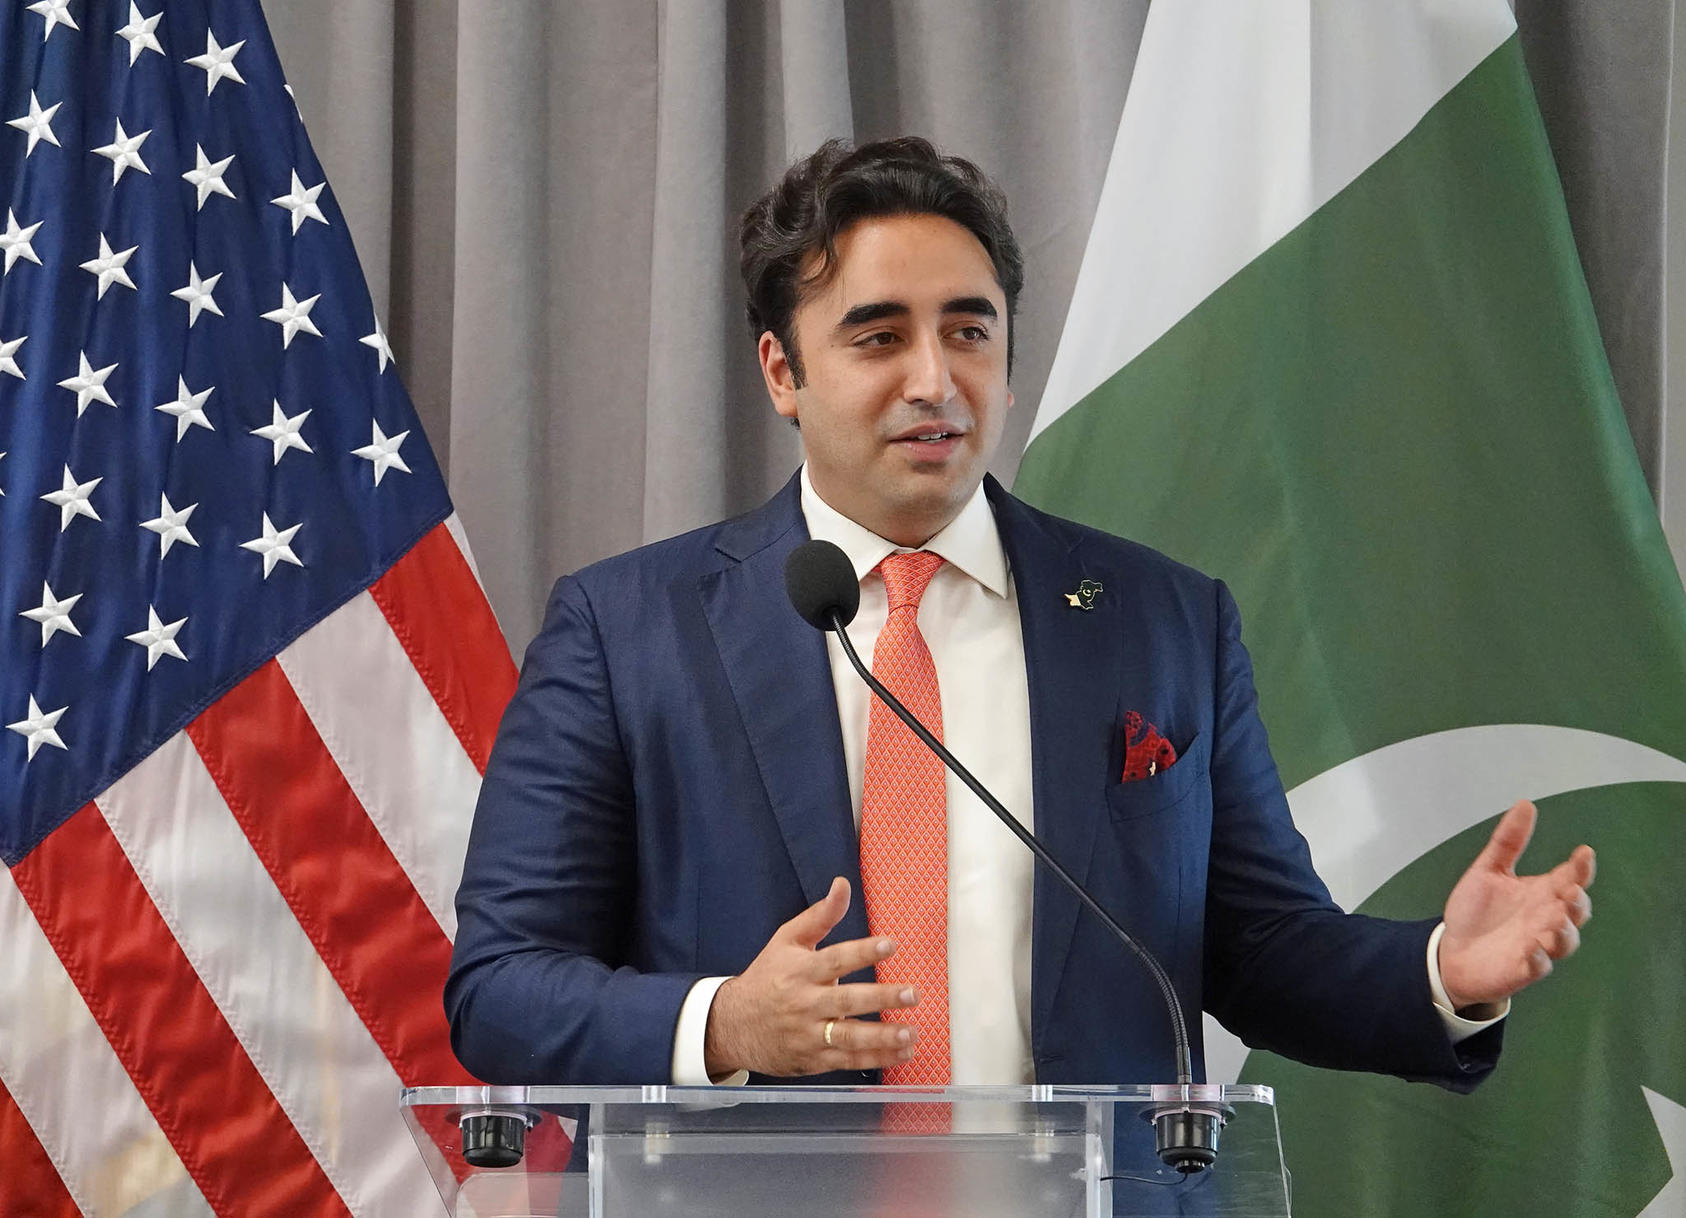 Pakistani Foreign Minister Bilawal Bhutto Zardari speaks to U.S. officials and policy experts at USIP, urging support for a global response to his country’s flood that can build a system to help developing countries most vulnerable to climate disasters.